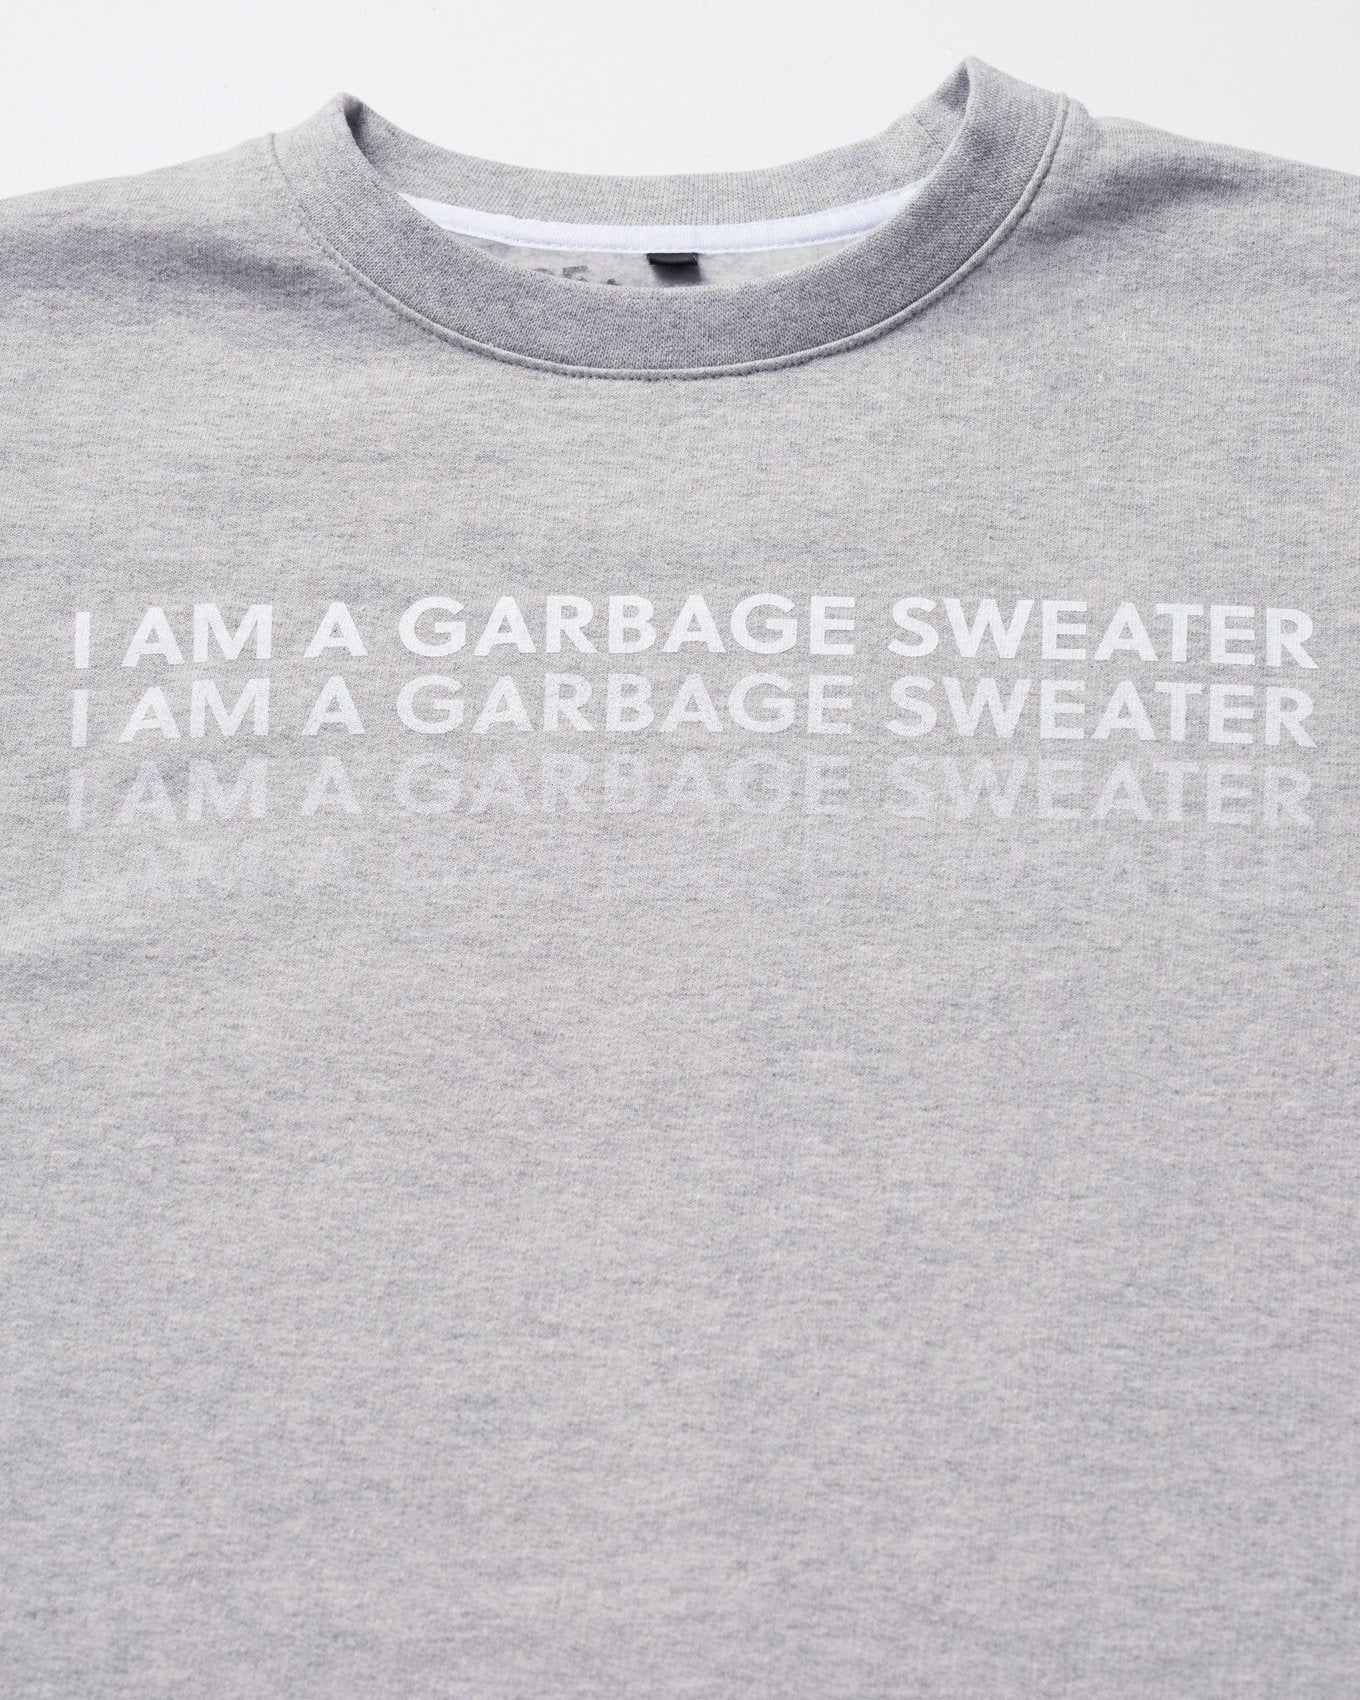 ReApparel Garbage Crew Neck . in color Medium Heather Grey and shape long sleeve